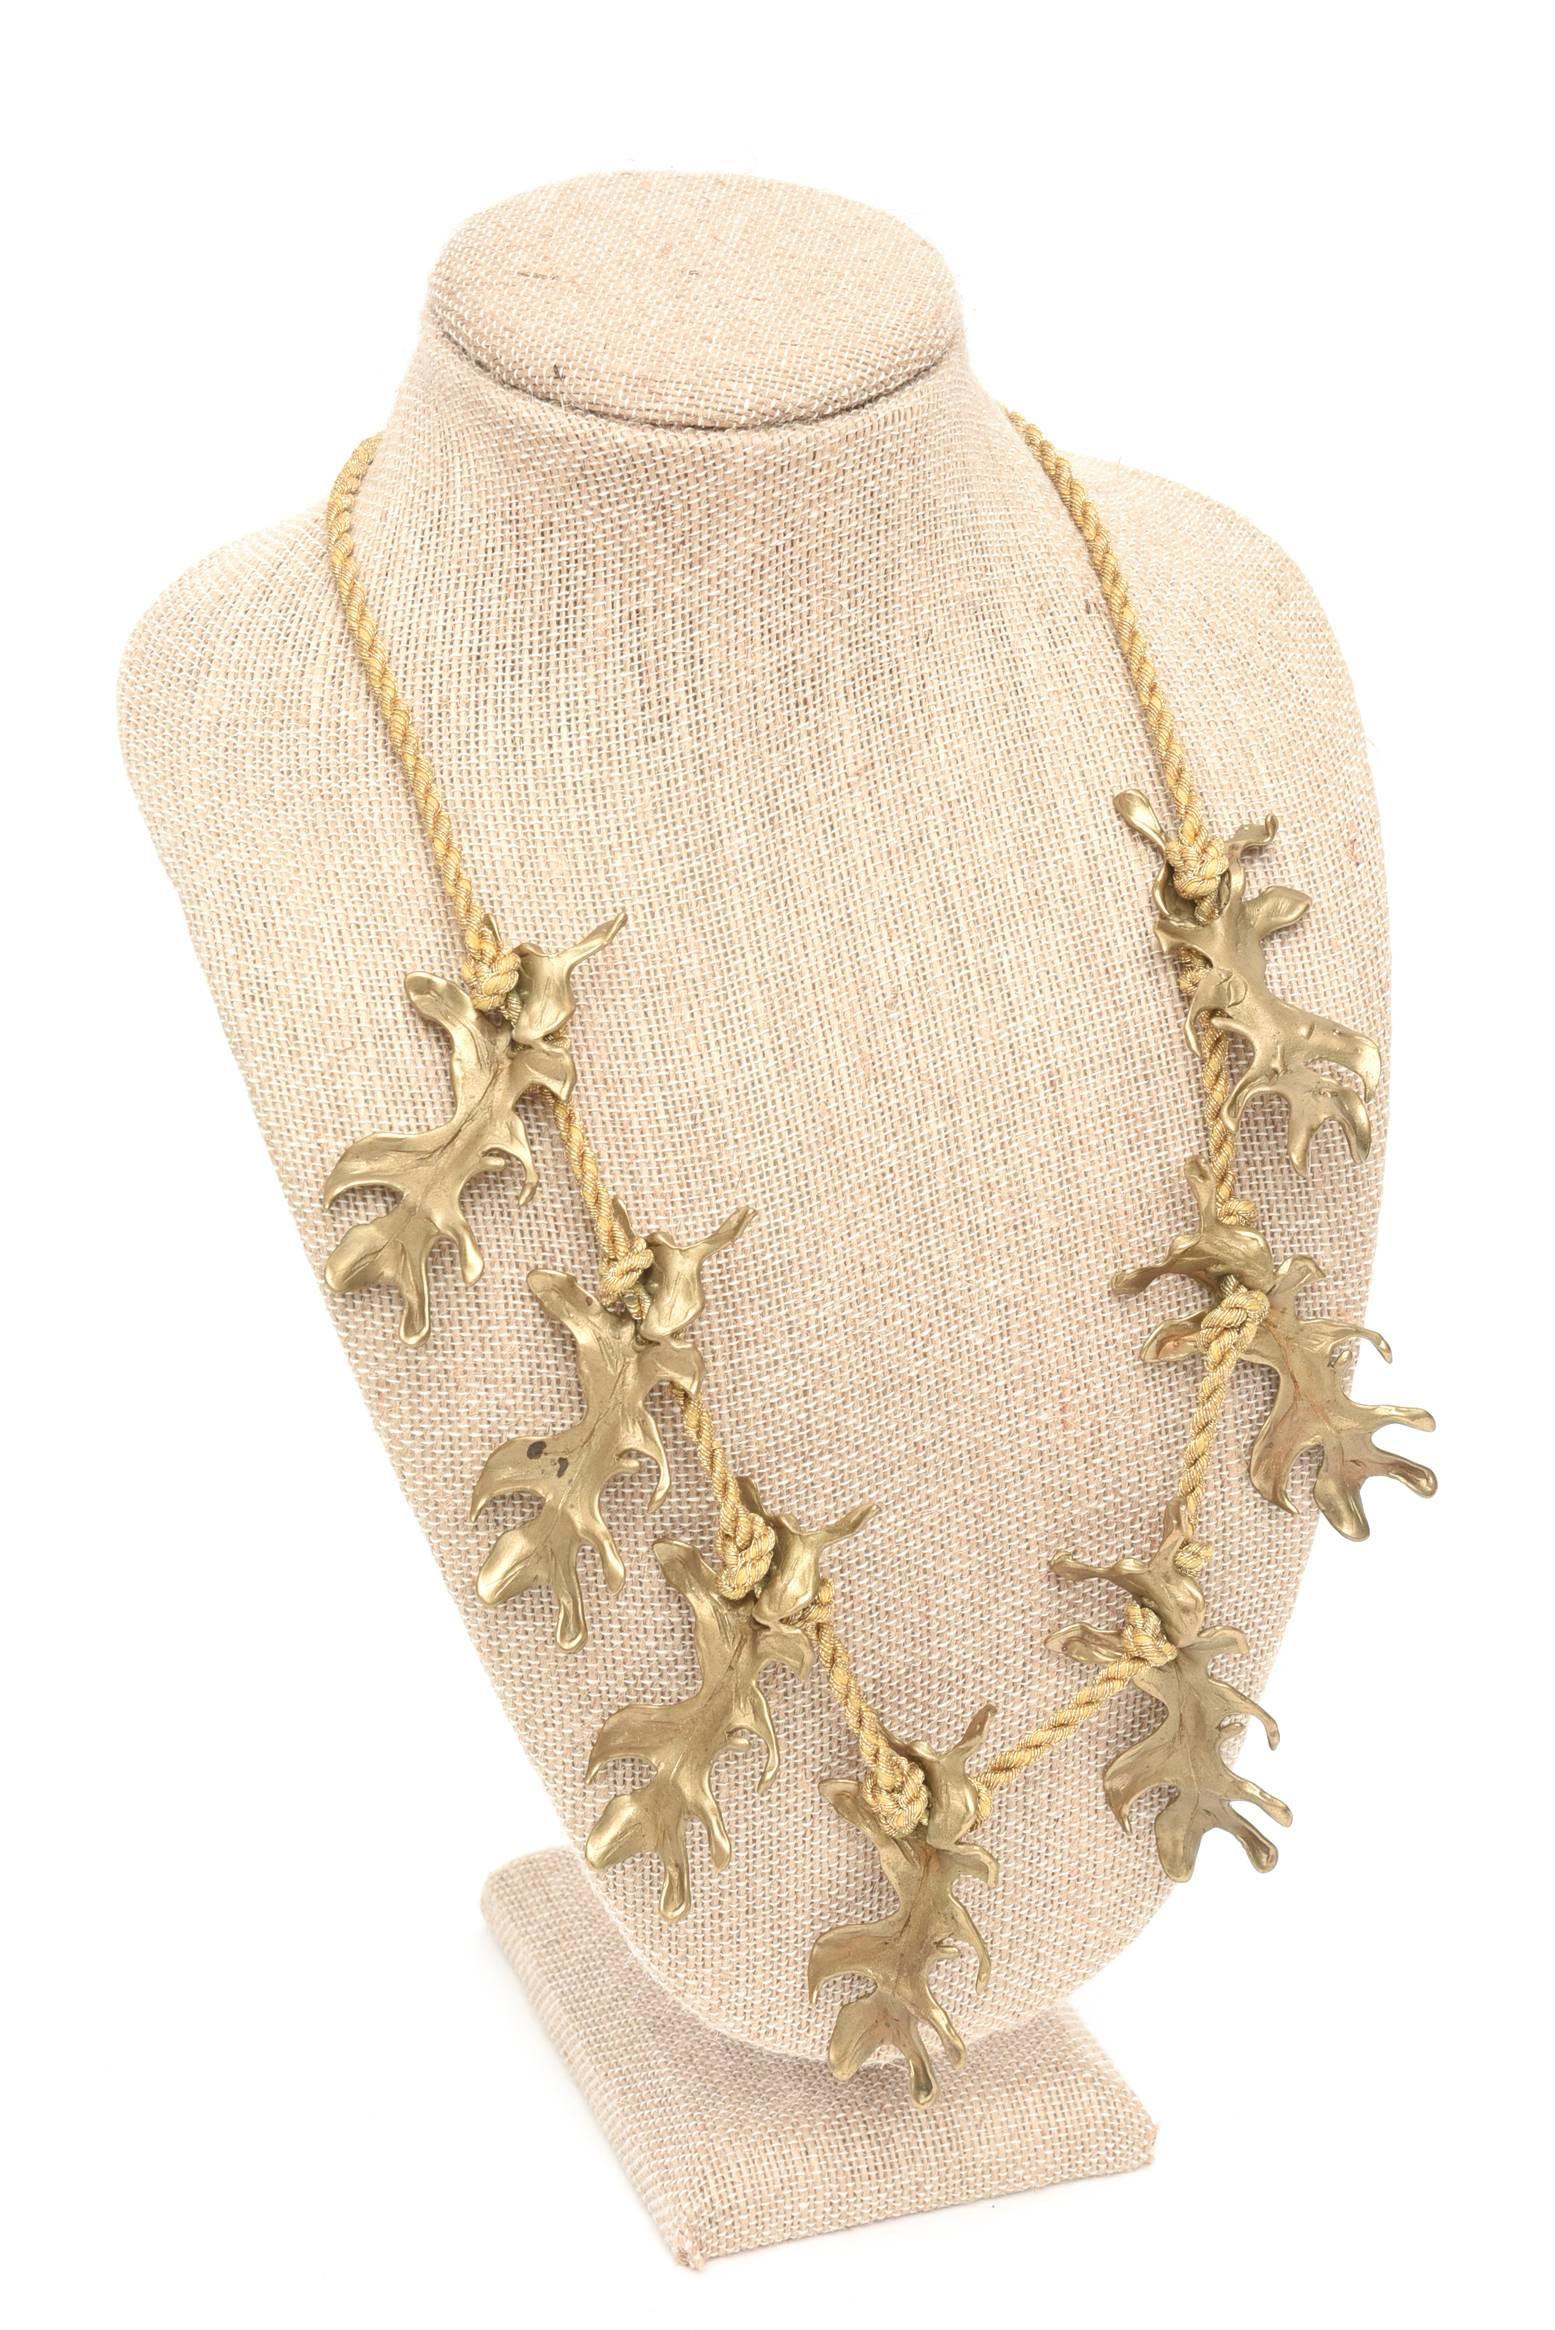 Modern Mary McFadden Bronze and Silk Braided Rope Couture Sculptural Necklace Vintage For Sale